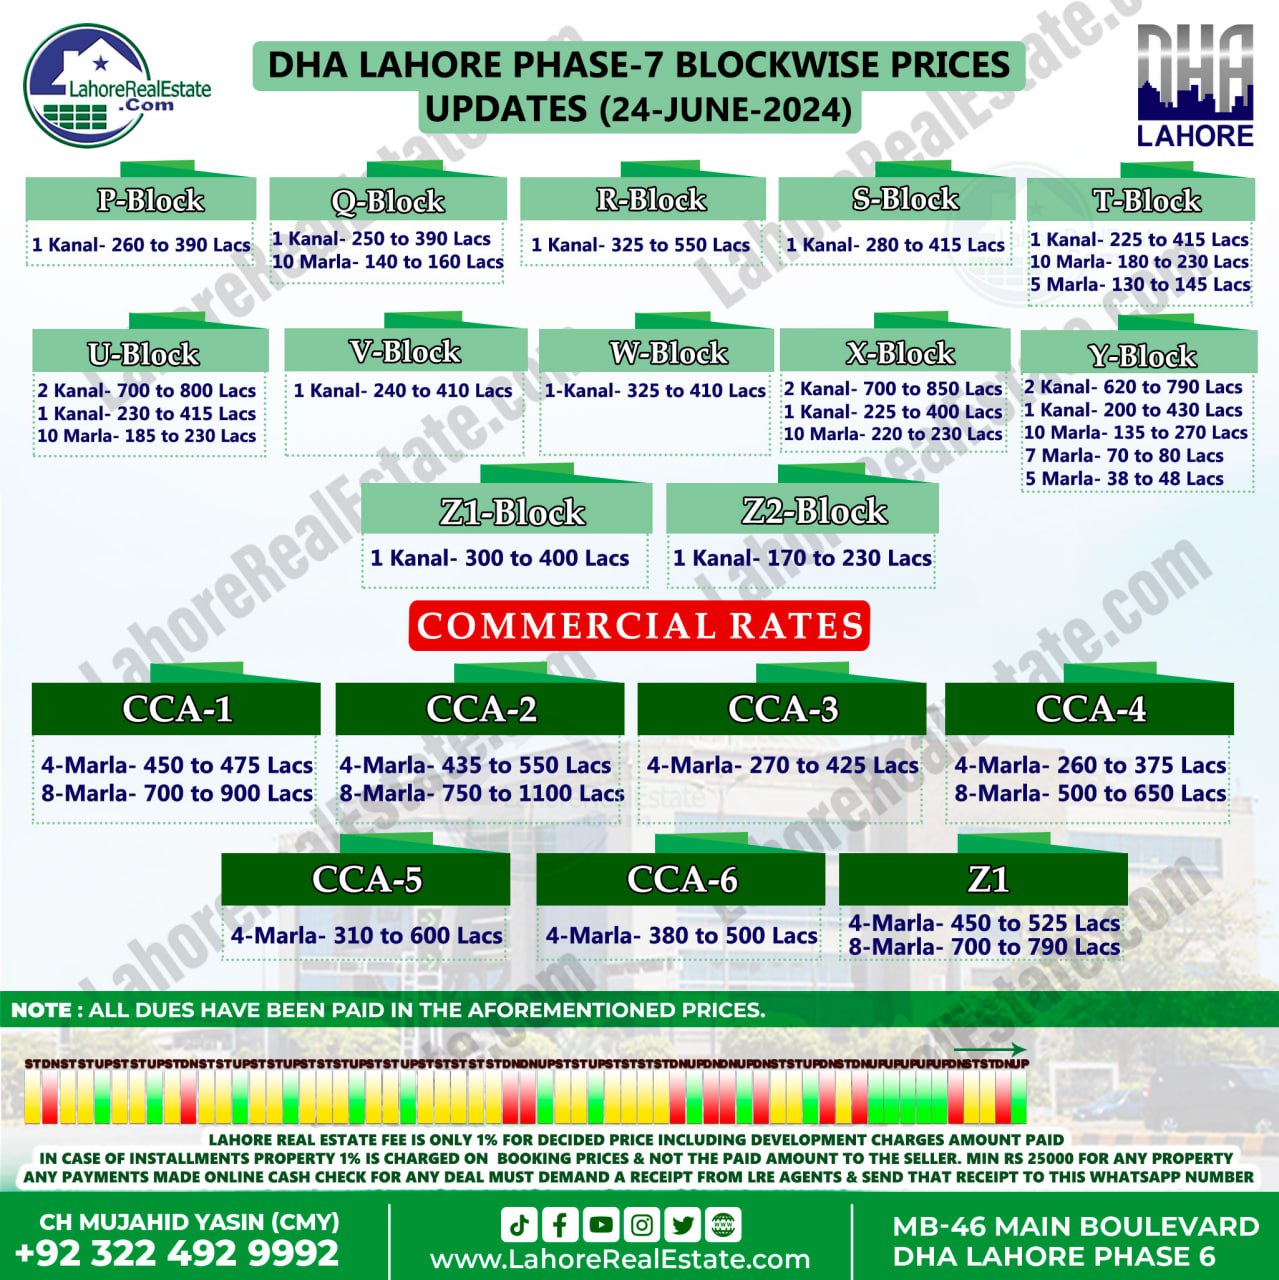 DHA Lahore Phase 7 Plot Prices Blockwise Rates June 24, 2024